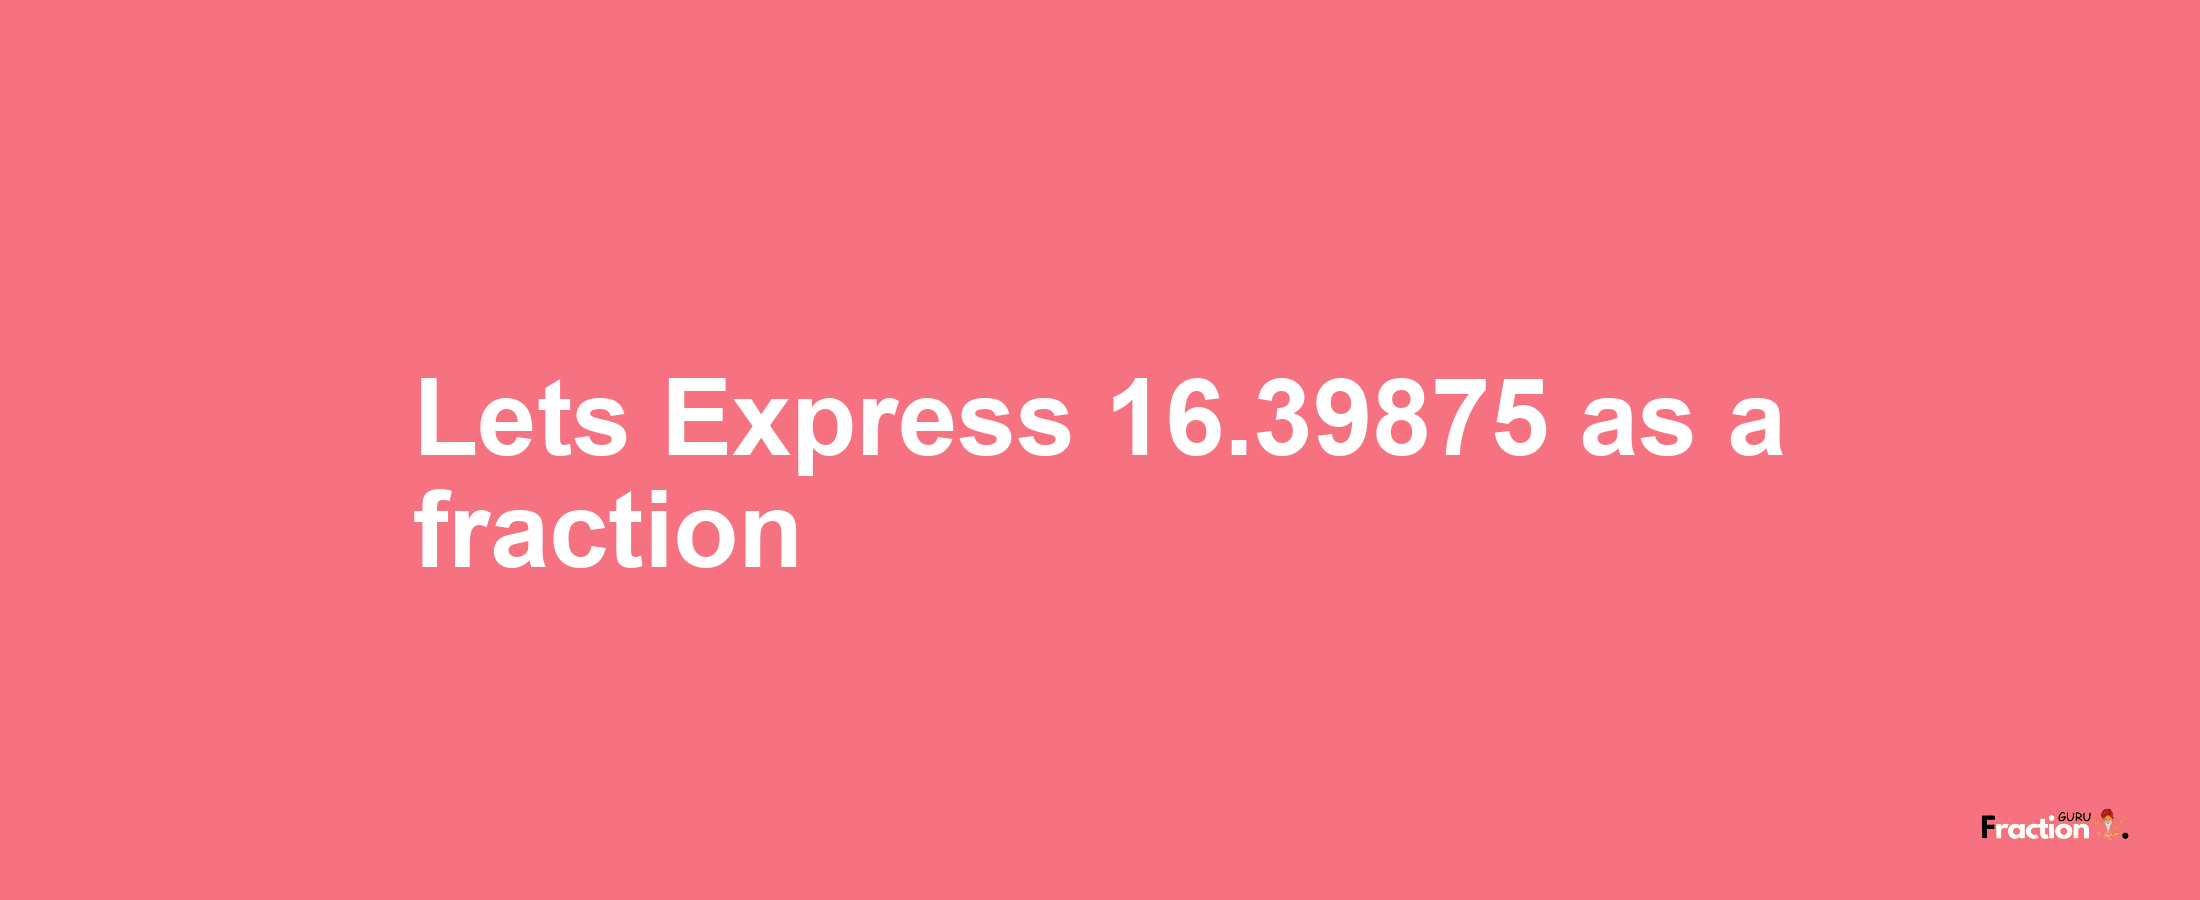 Lets Express 16.39875 as afraction